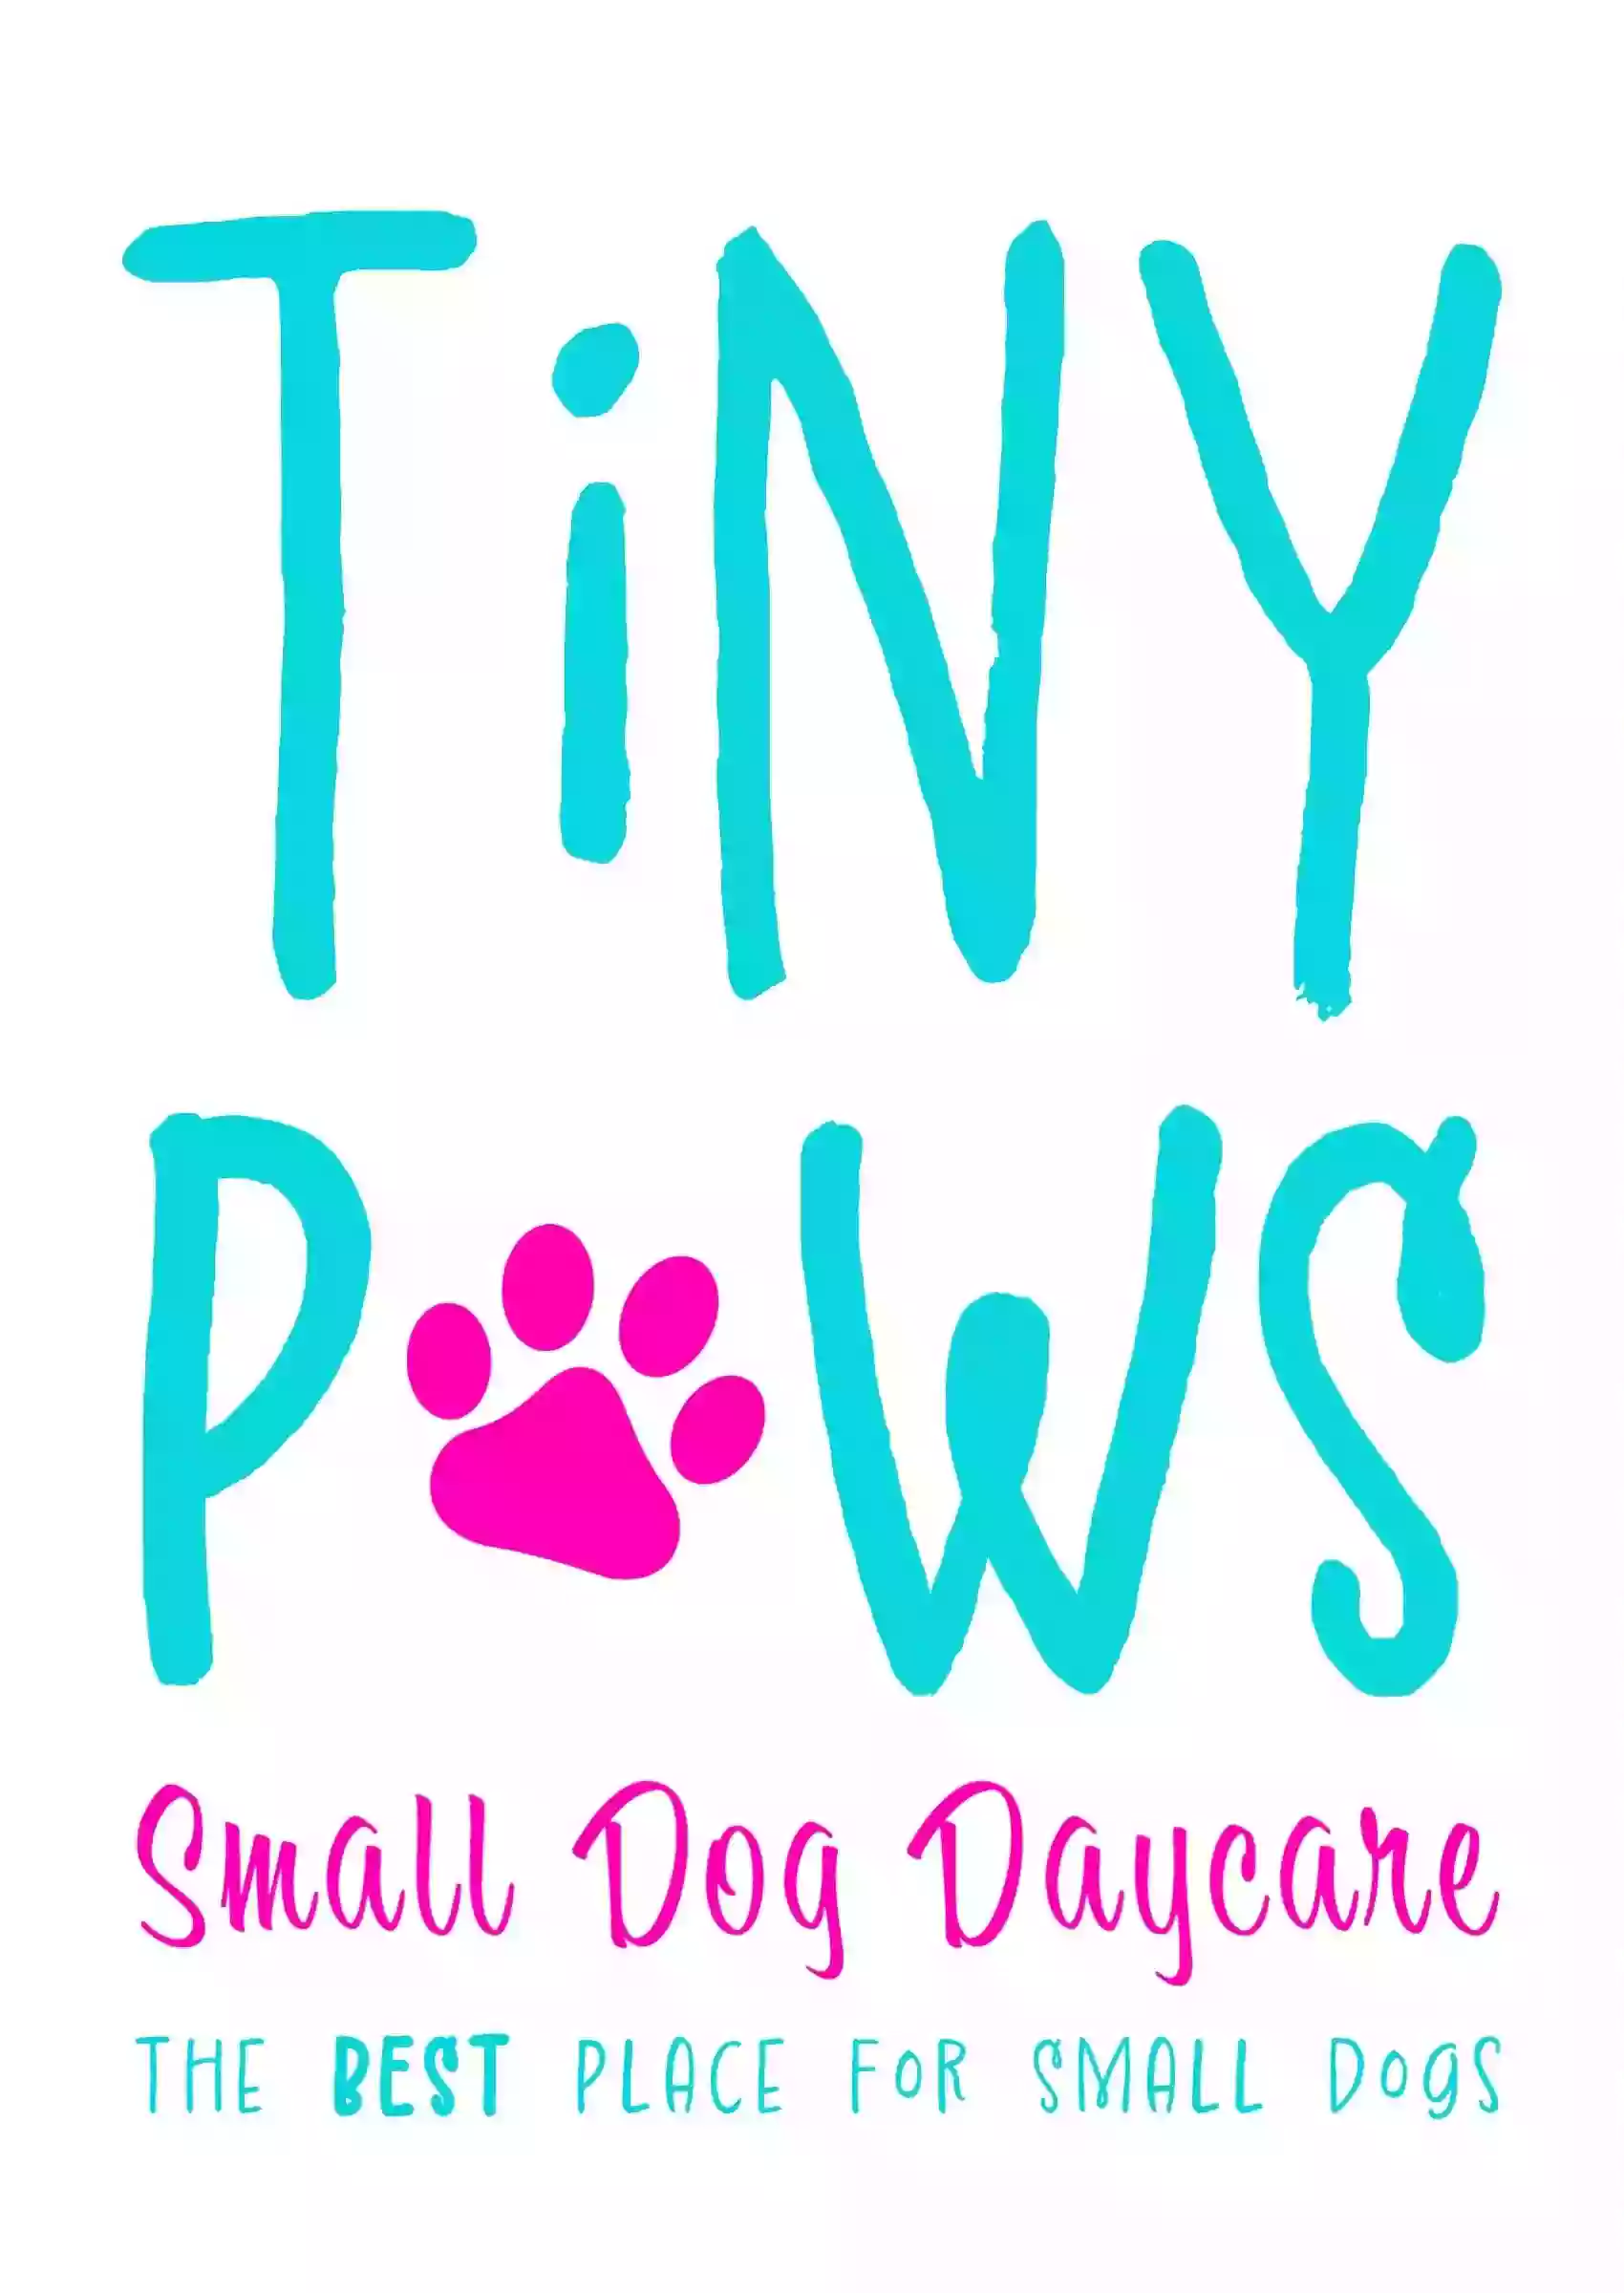 Tiny Paws Doggy Daycare "The BEST Place for Small Dogs!"